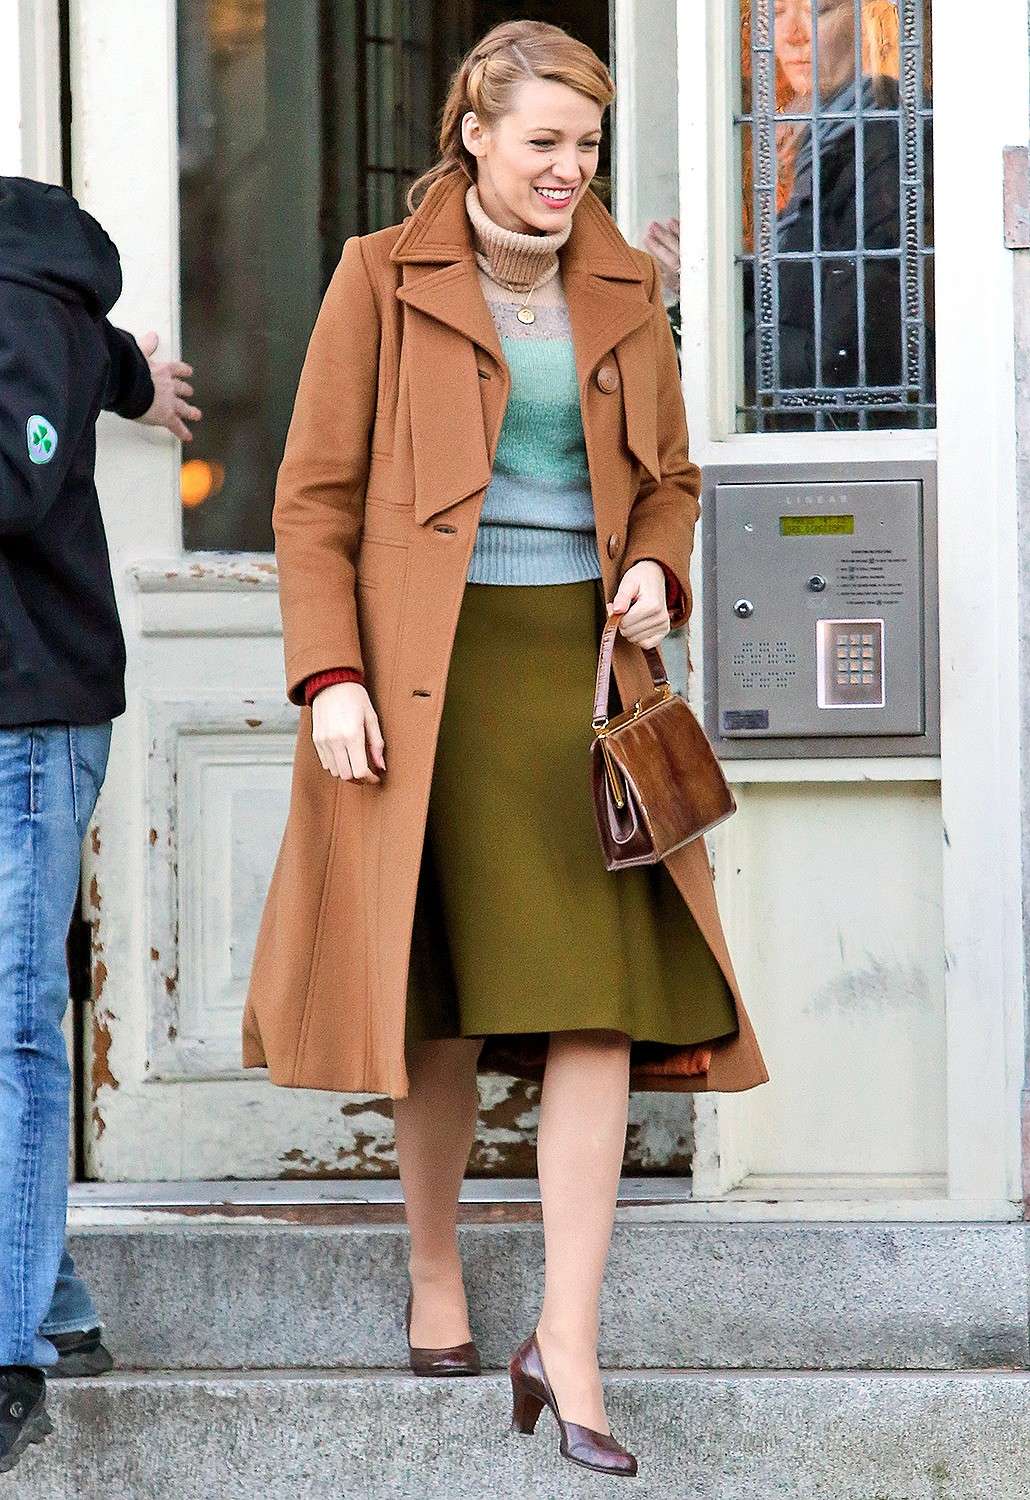 Blake Lively in Age of Adaline in Vancouver